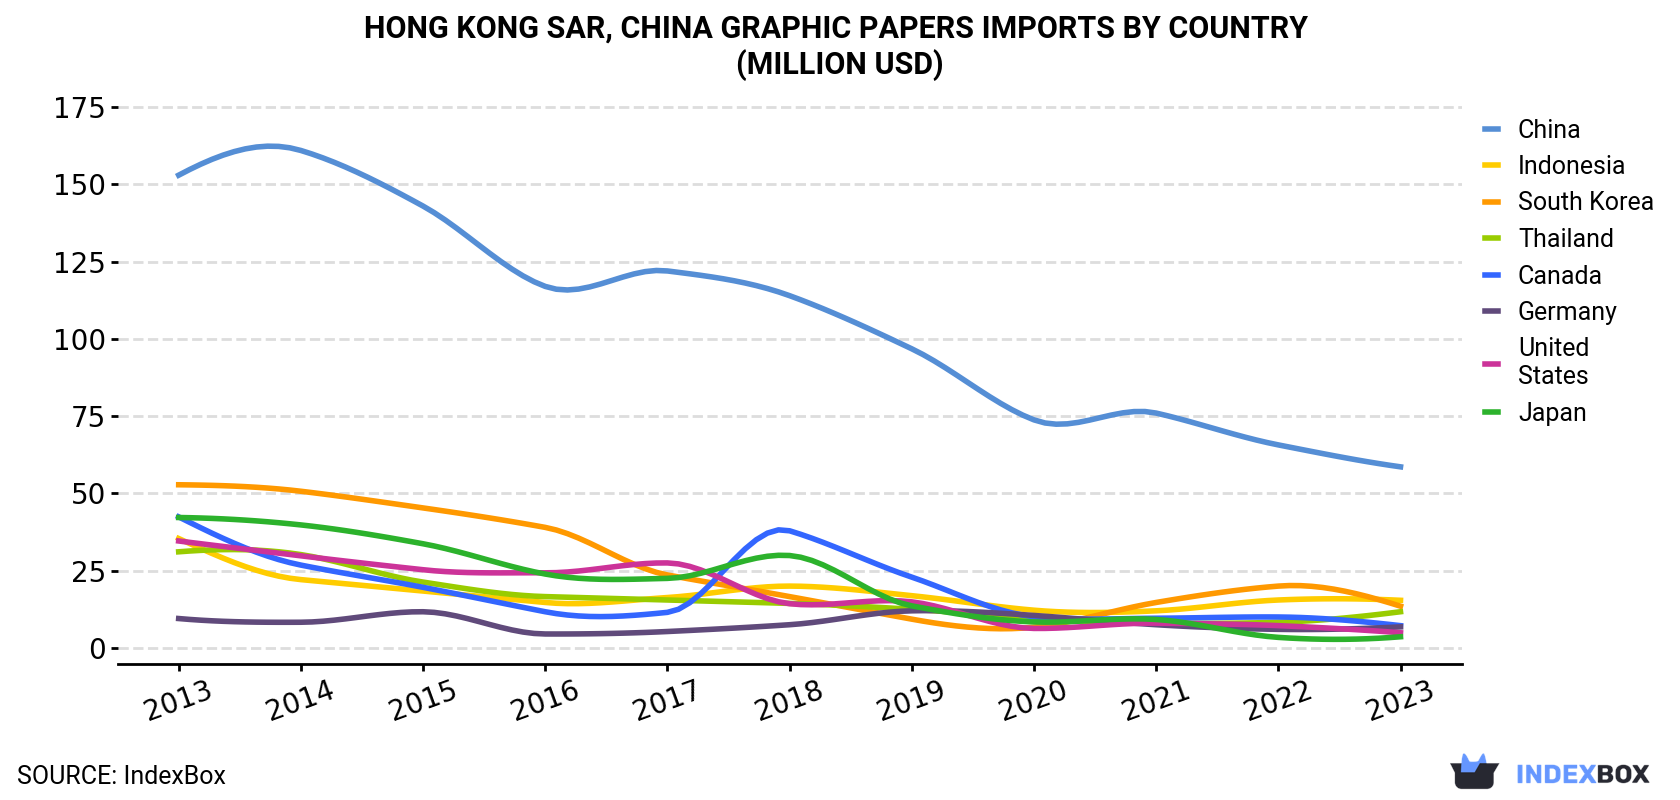 Hong Kong Graphic Papers Imports By Country (Million USD)